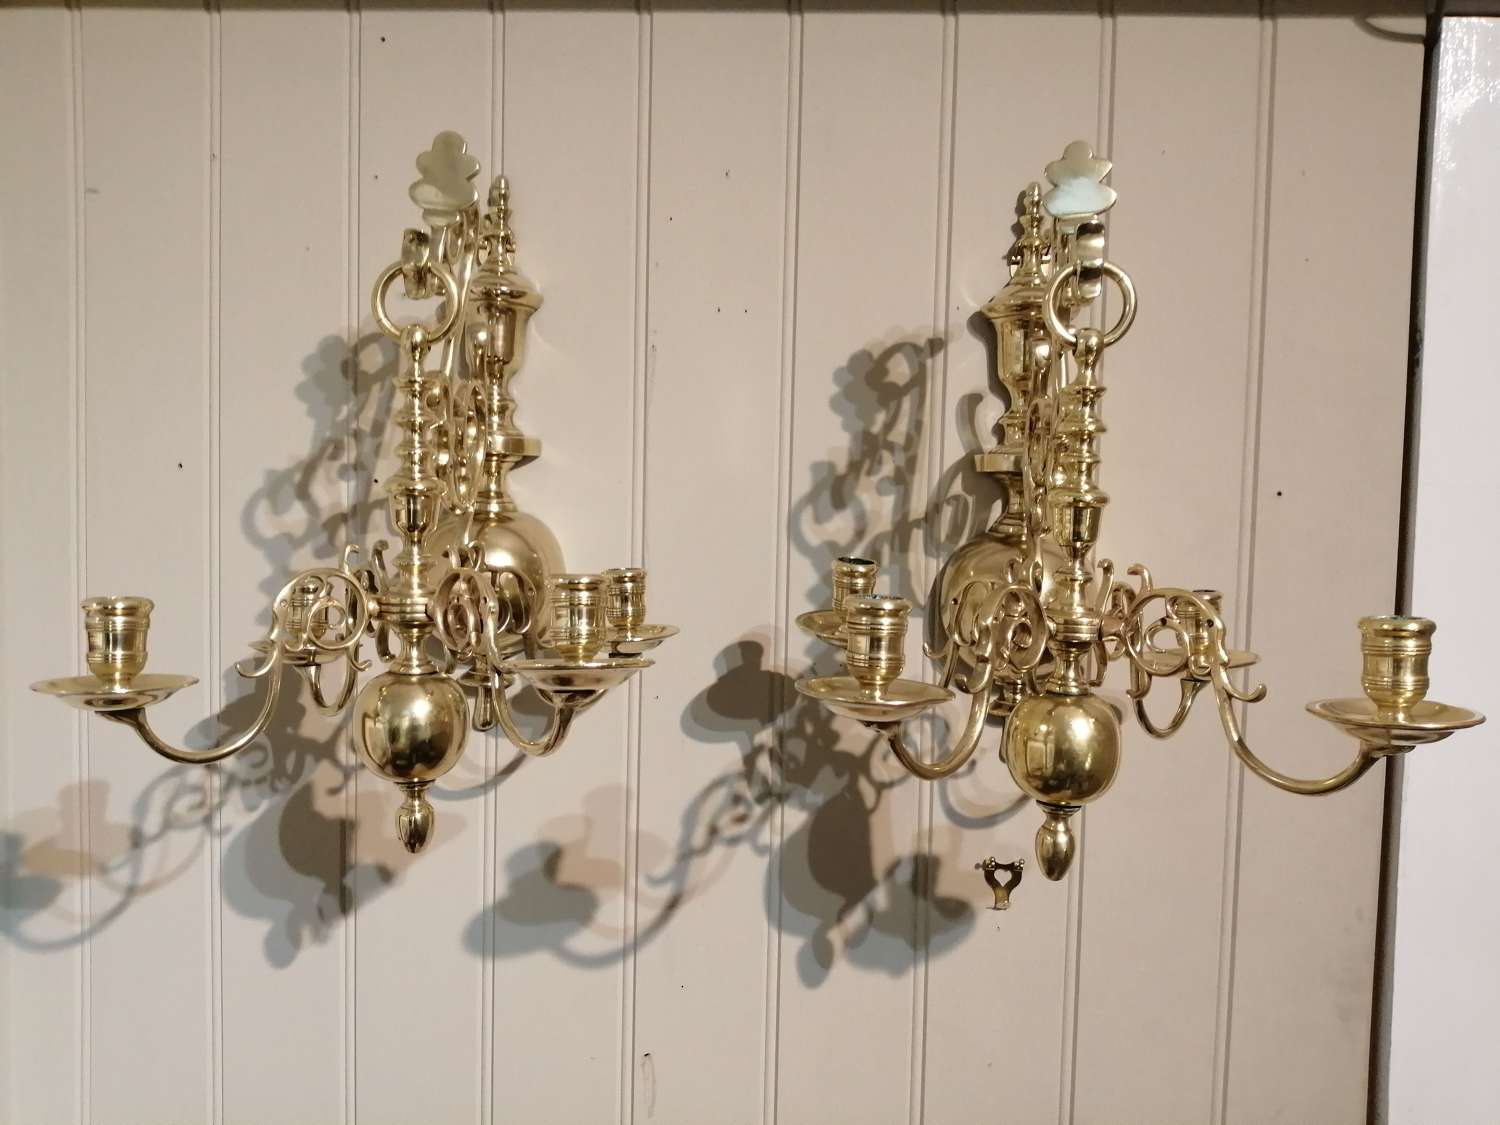 A most unusual pair of French brass chandelier wall lights